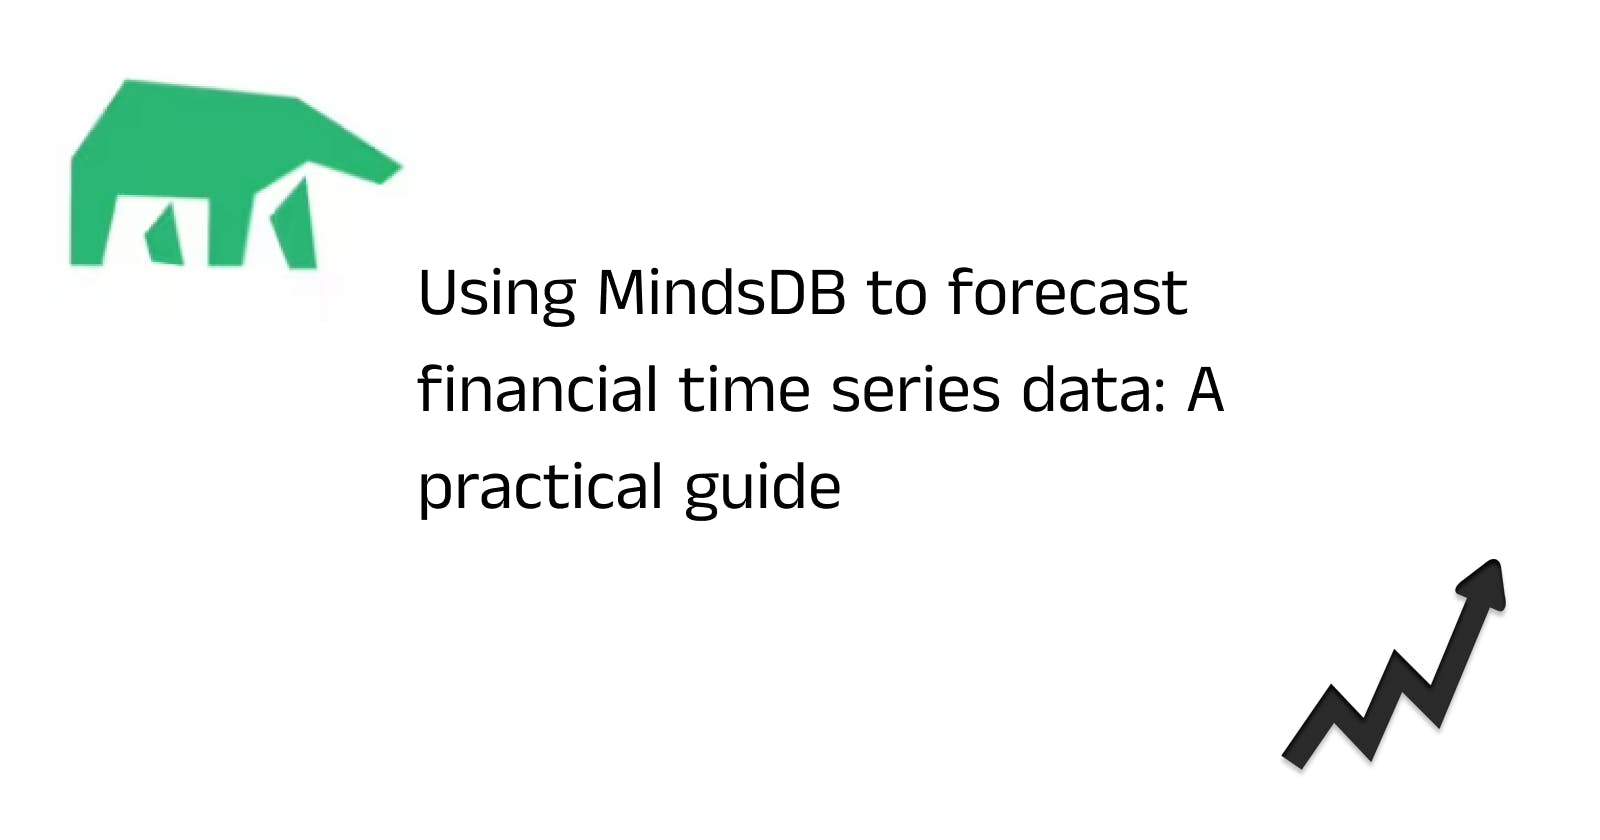 Using MindsDB to forecast financial time series data: A practical guide